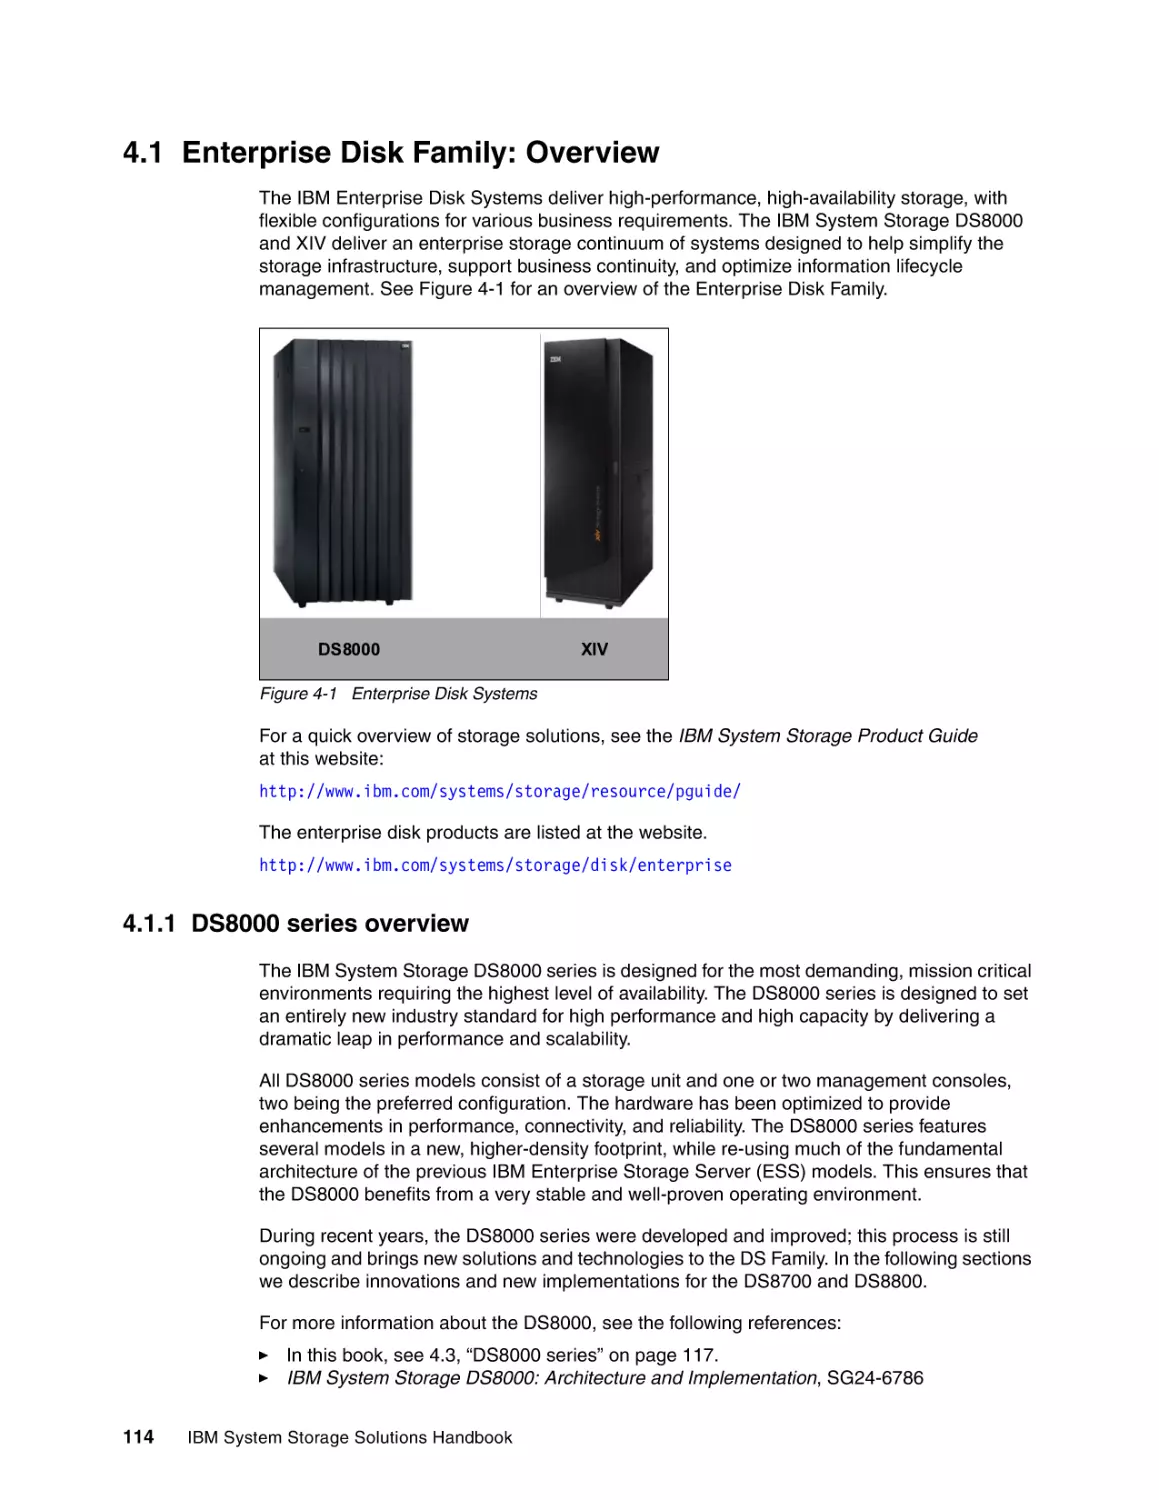 4.1 Enterprise Disk Family
4.1.1 DS8000 series overview